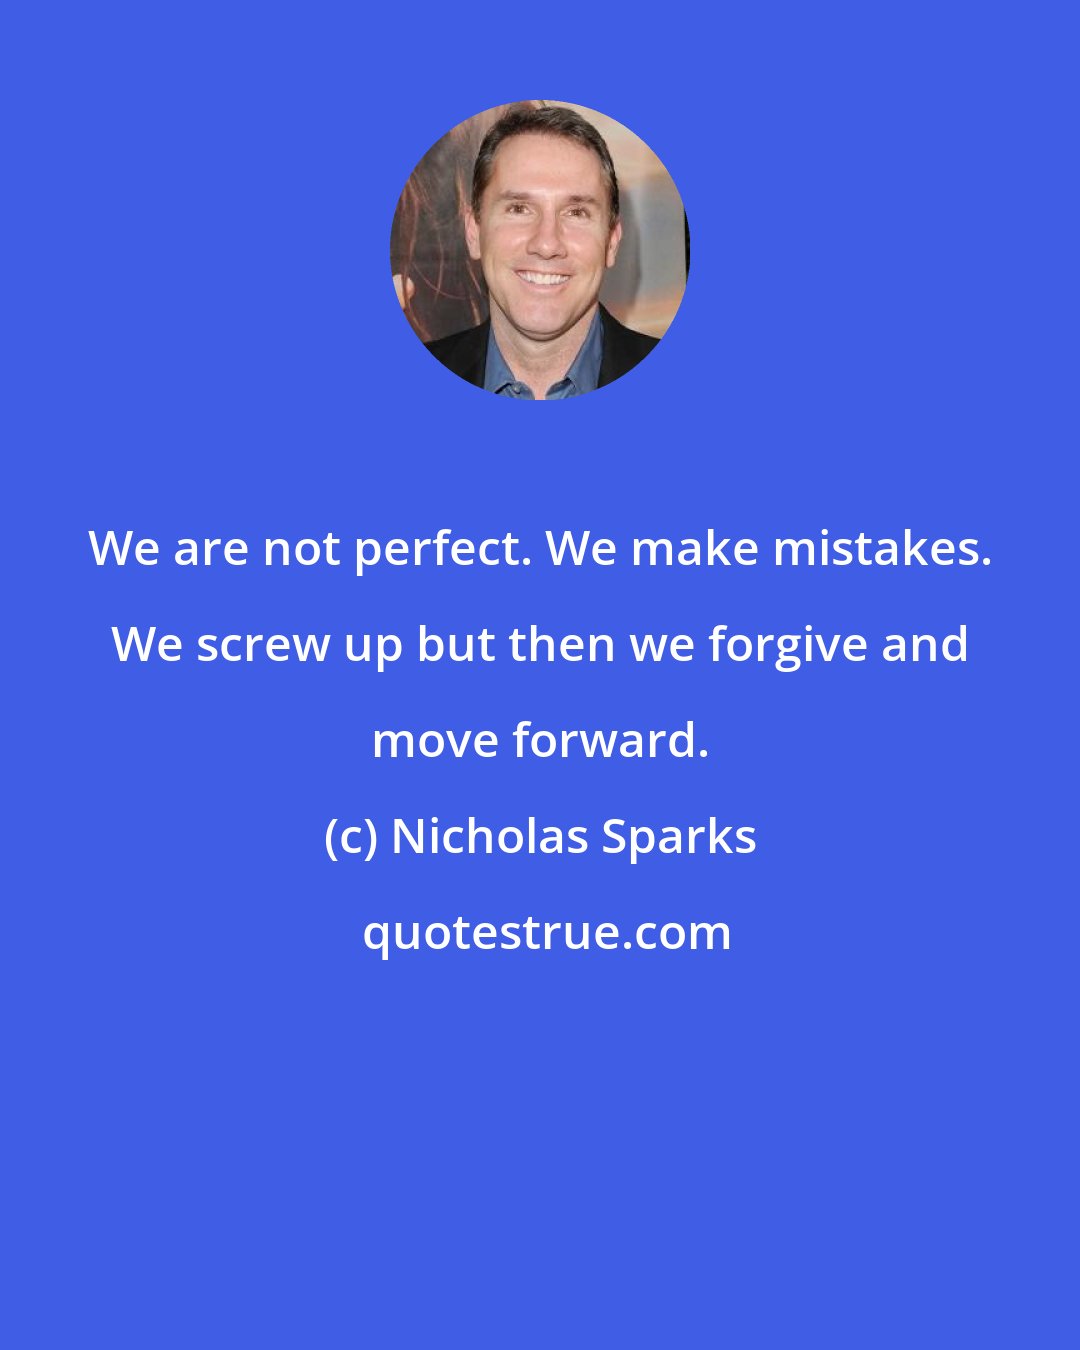 Nicholas Sparks: We are not perfect. We make mistakes. We screw up but then we forgive and move forward.